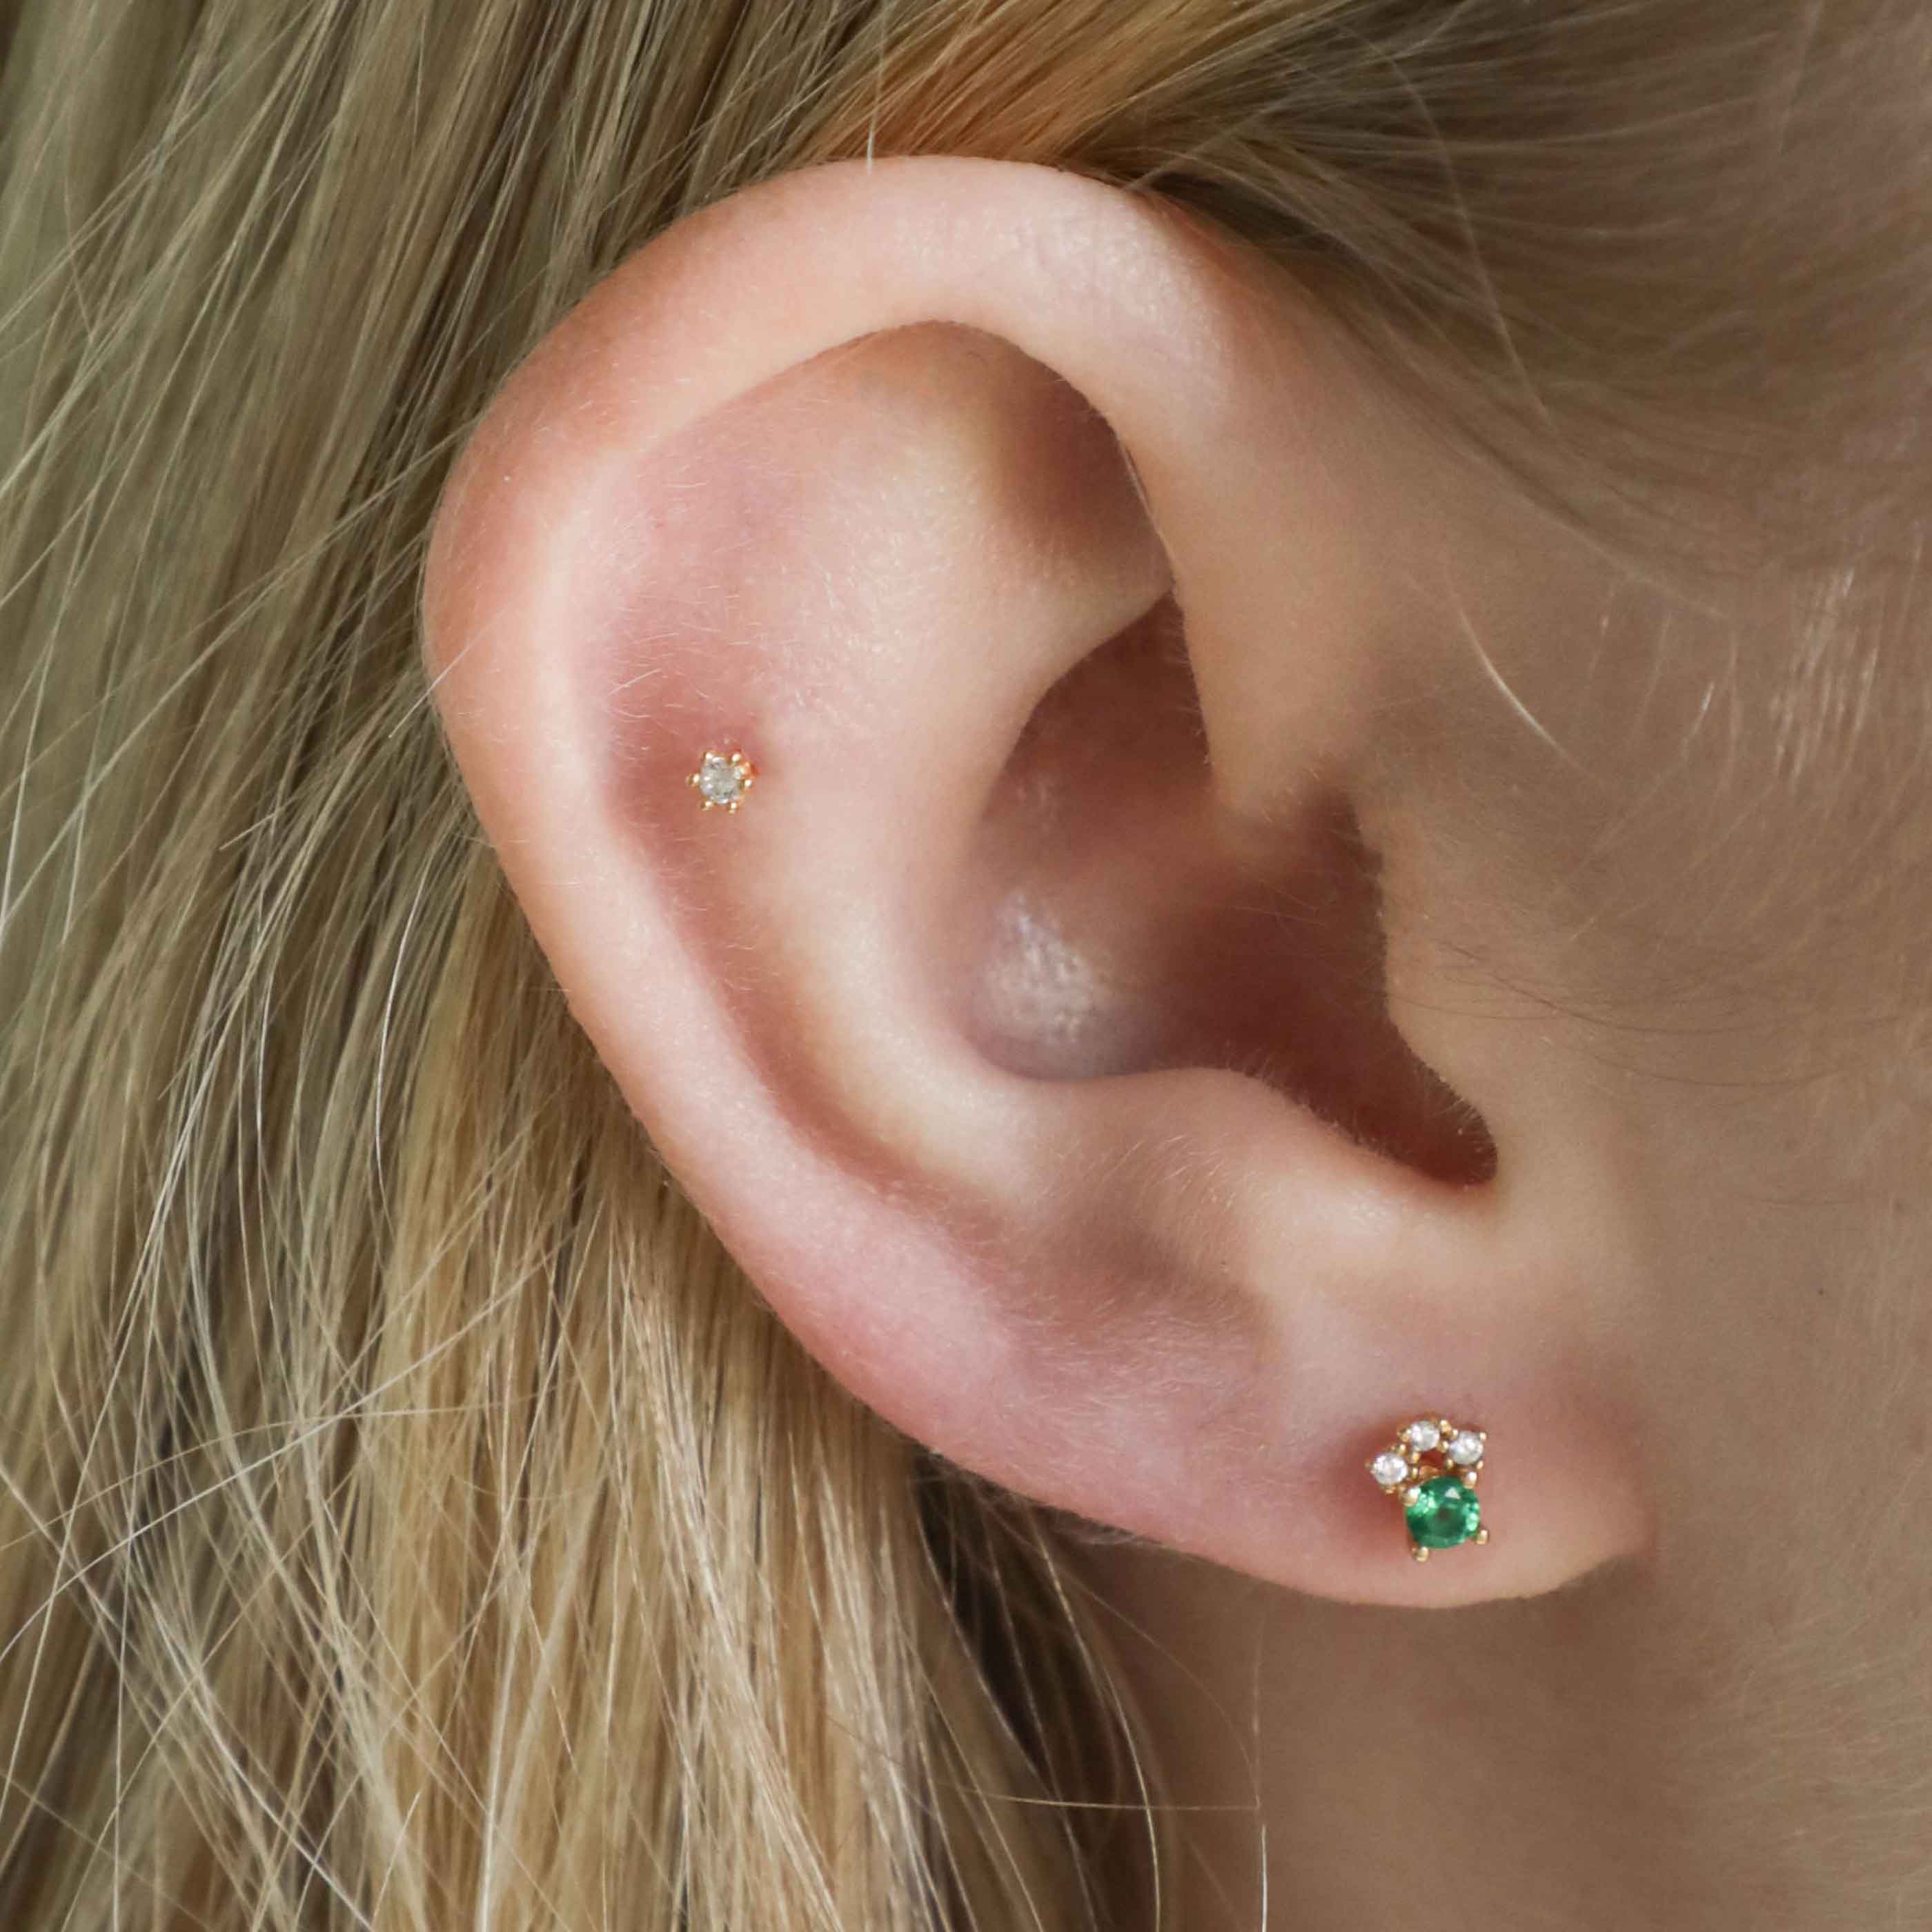 Emerald & Crystal Barbell in Gold worn in first lobe piercing